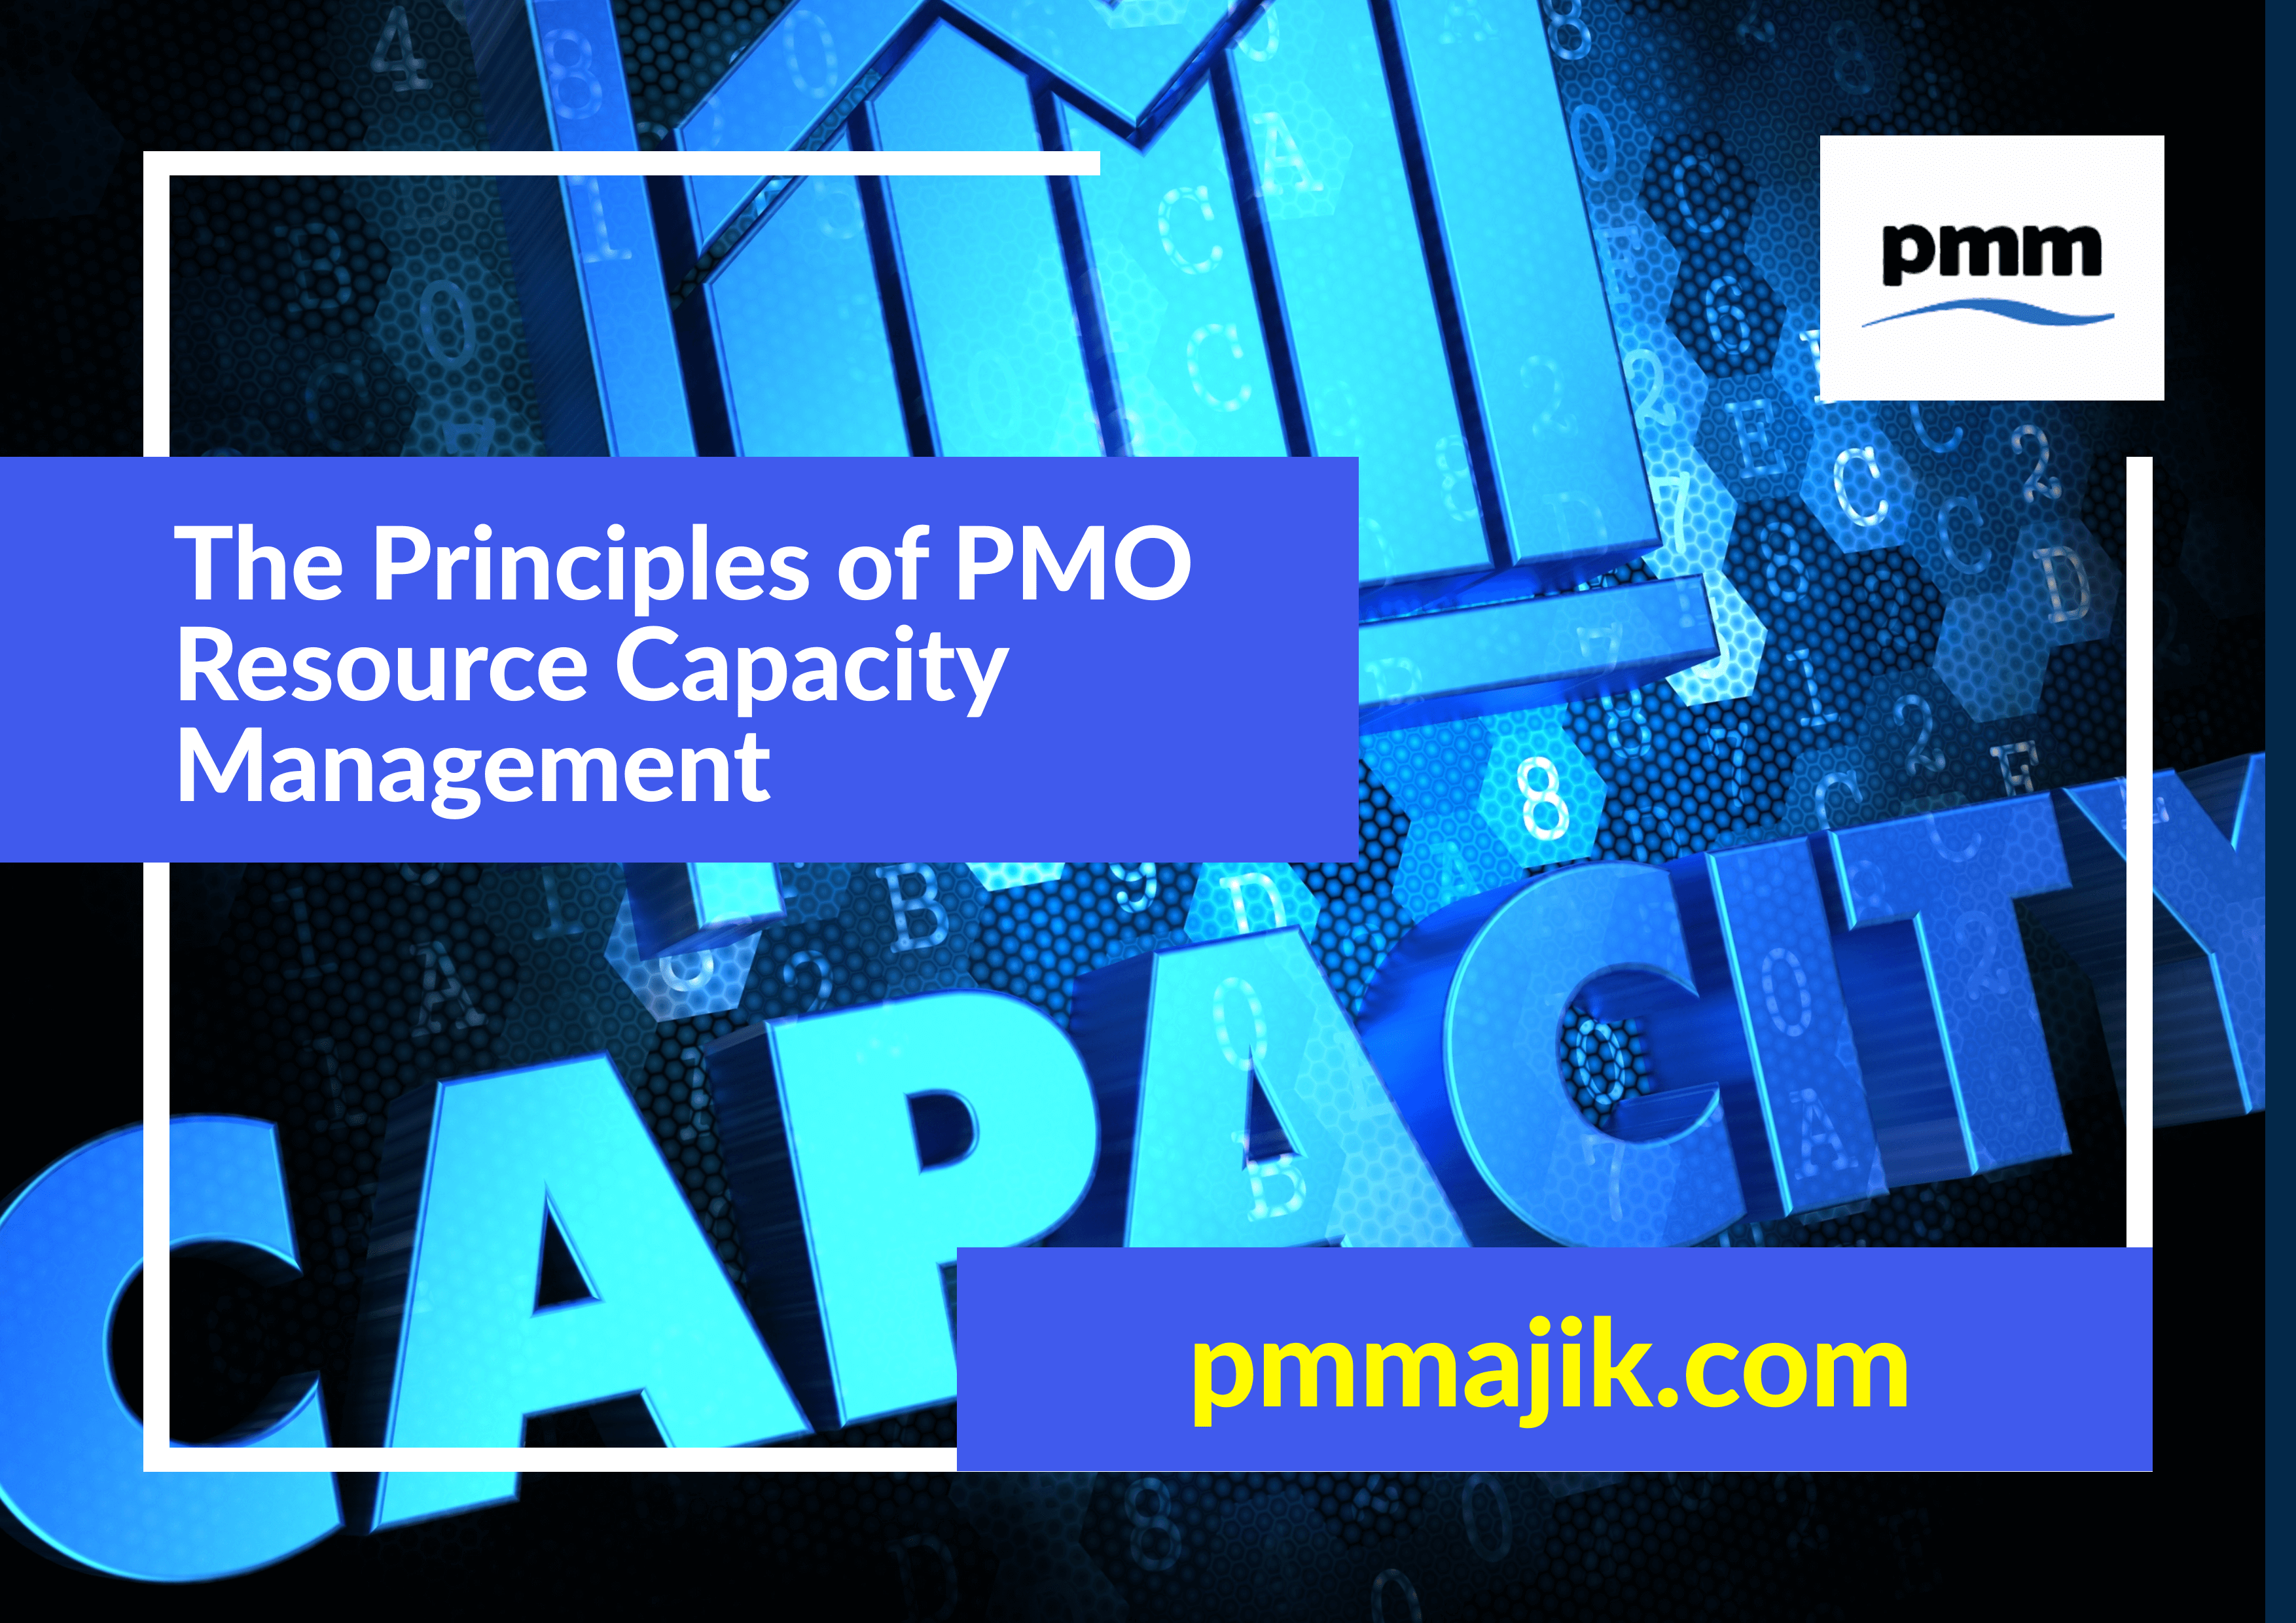 The Principles of PMO Resource Capacity Management